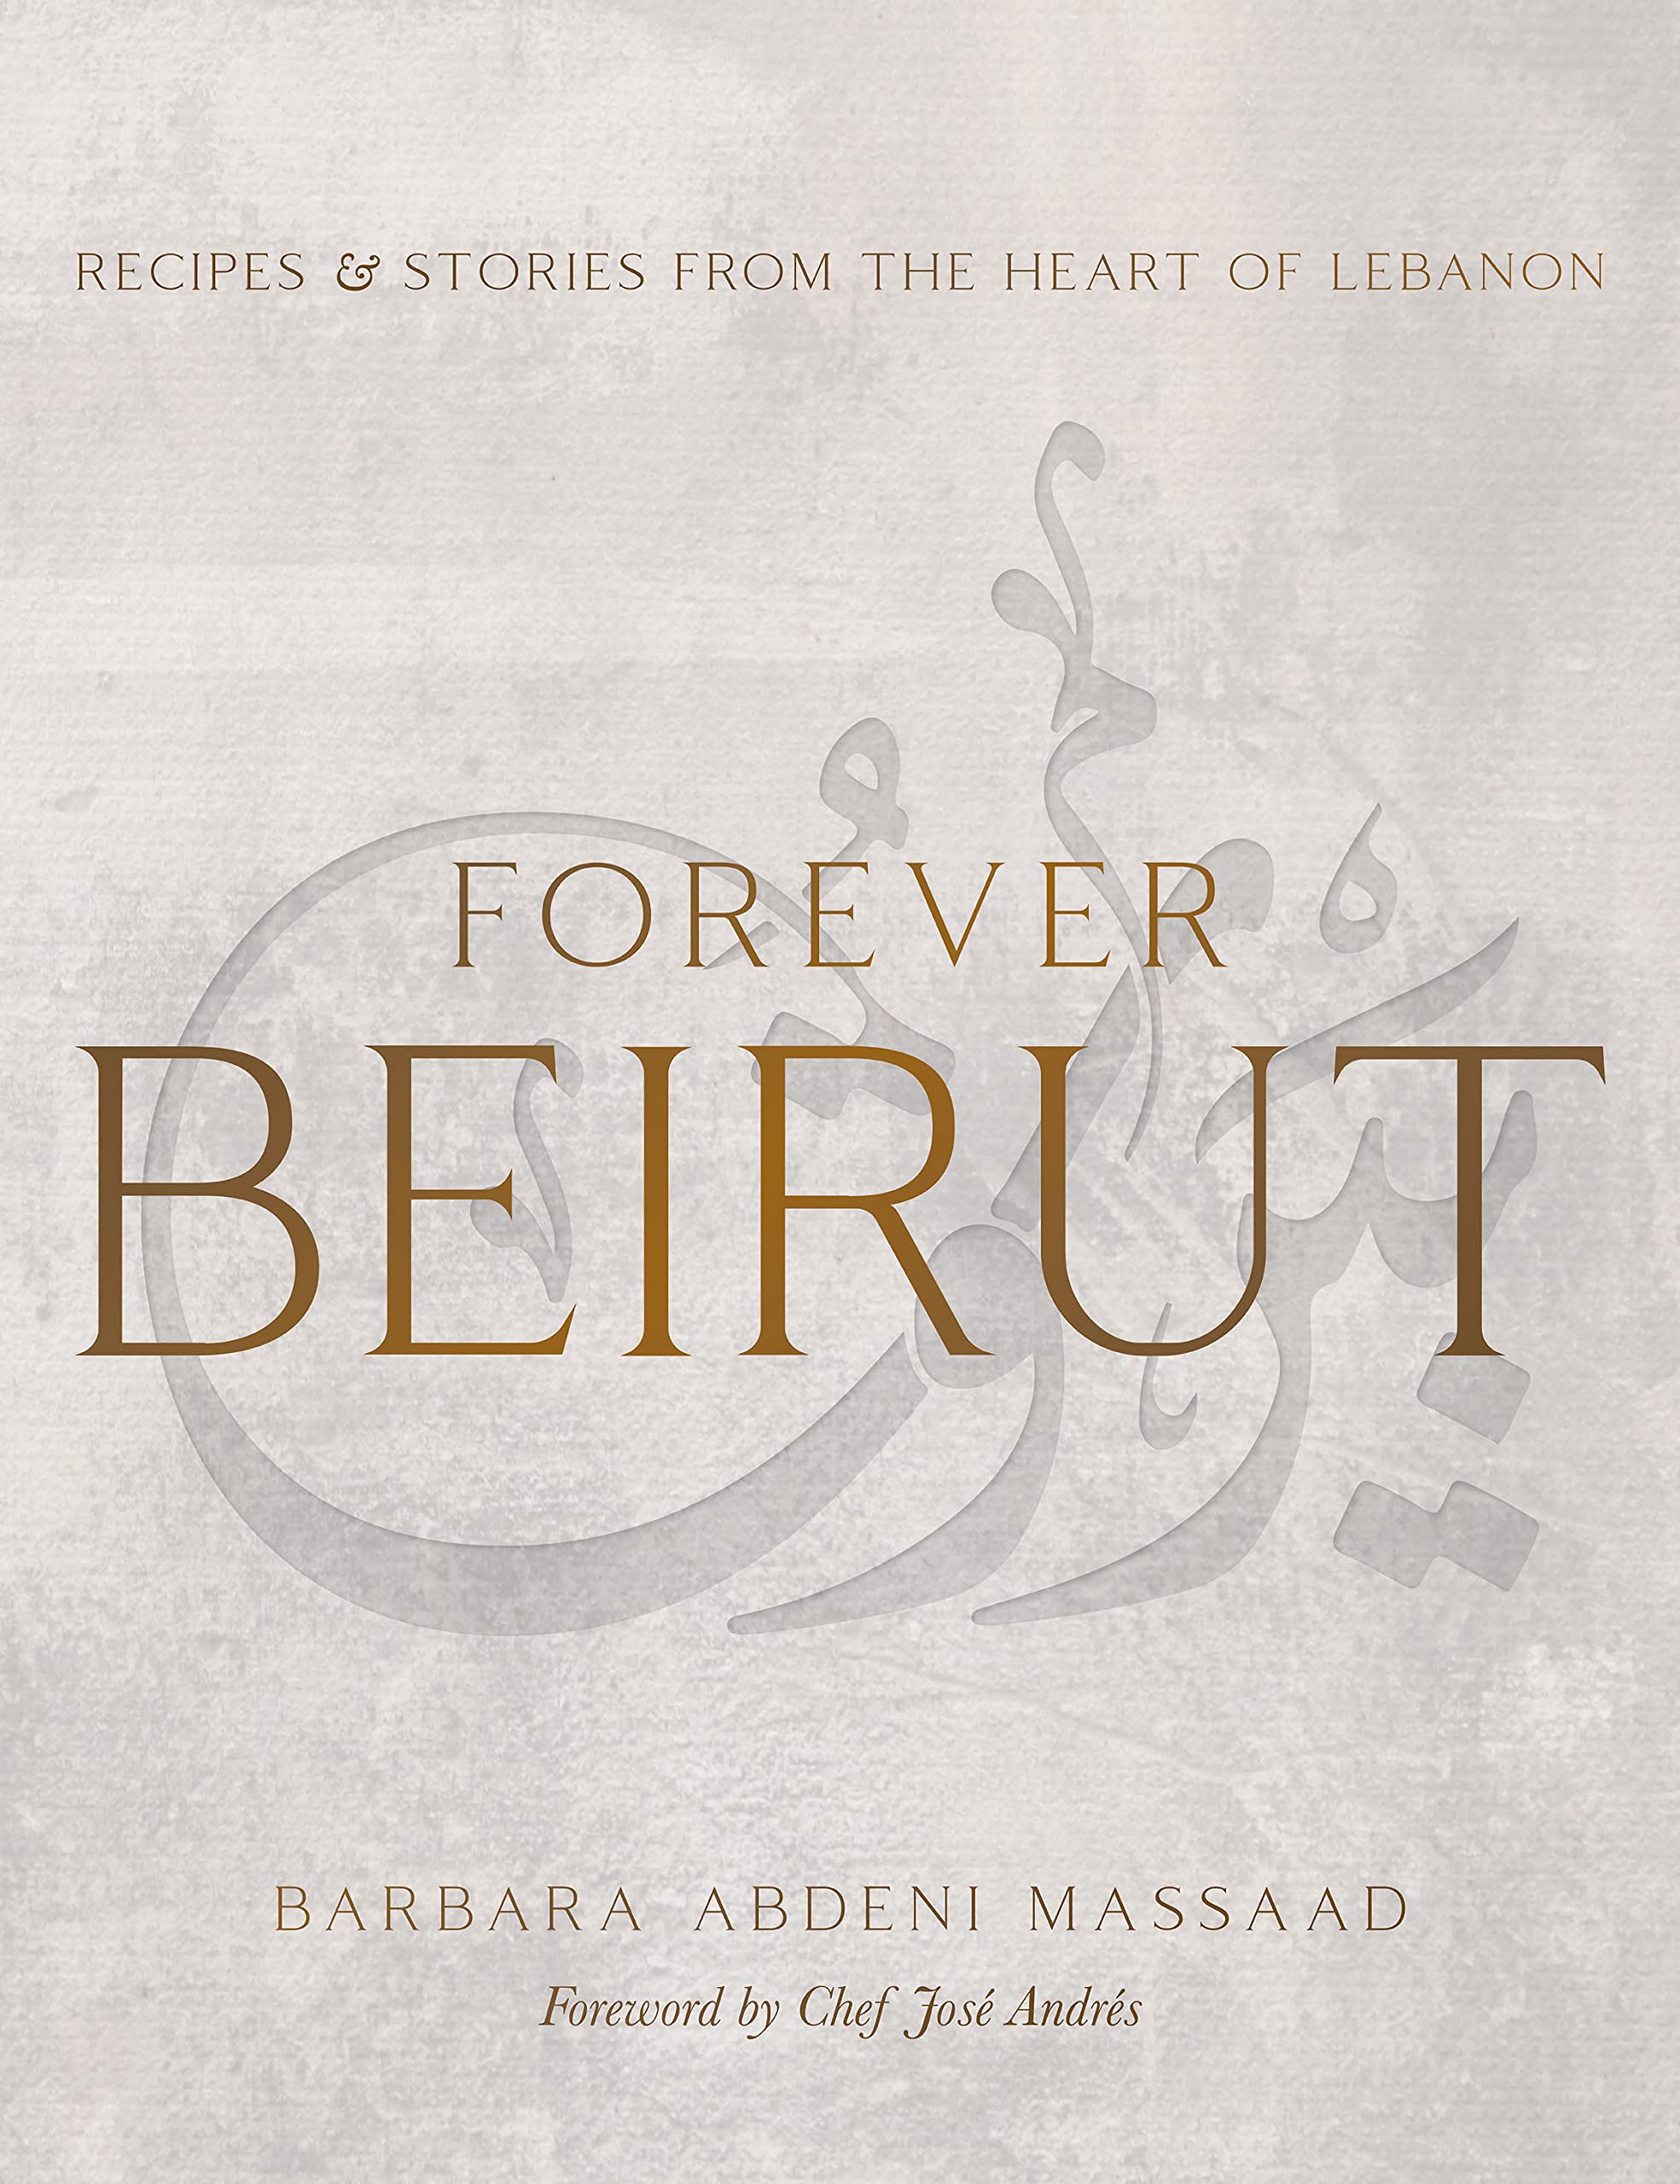 Forever Beirut: Recipes and Stories from the Heart of Lebanon (Barbara Abdeni Massaad)